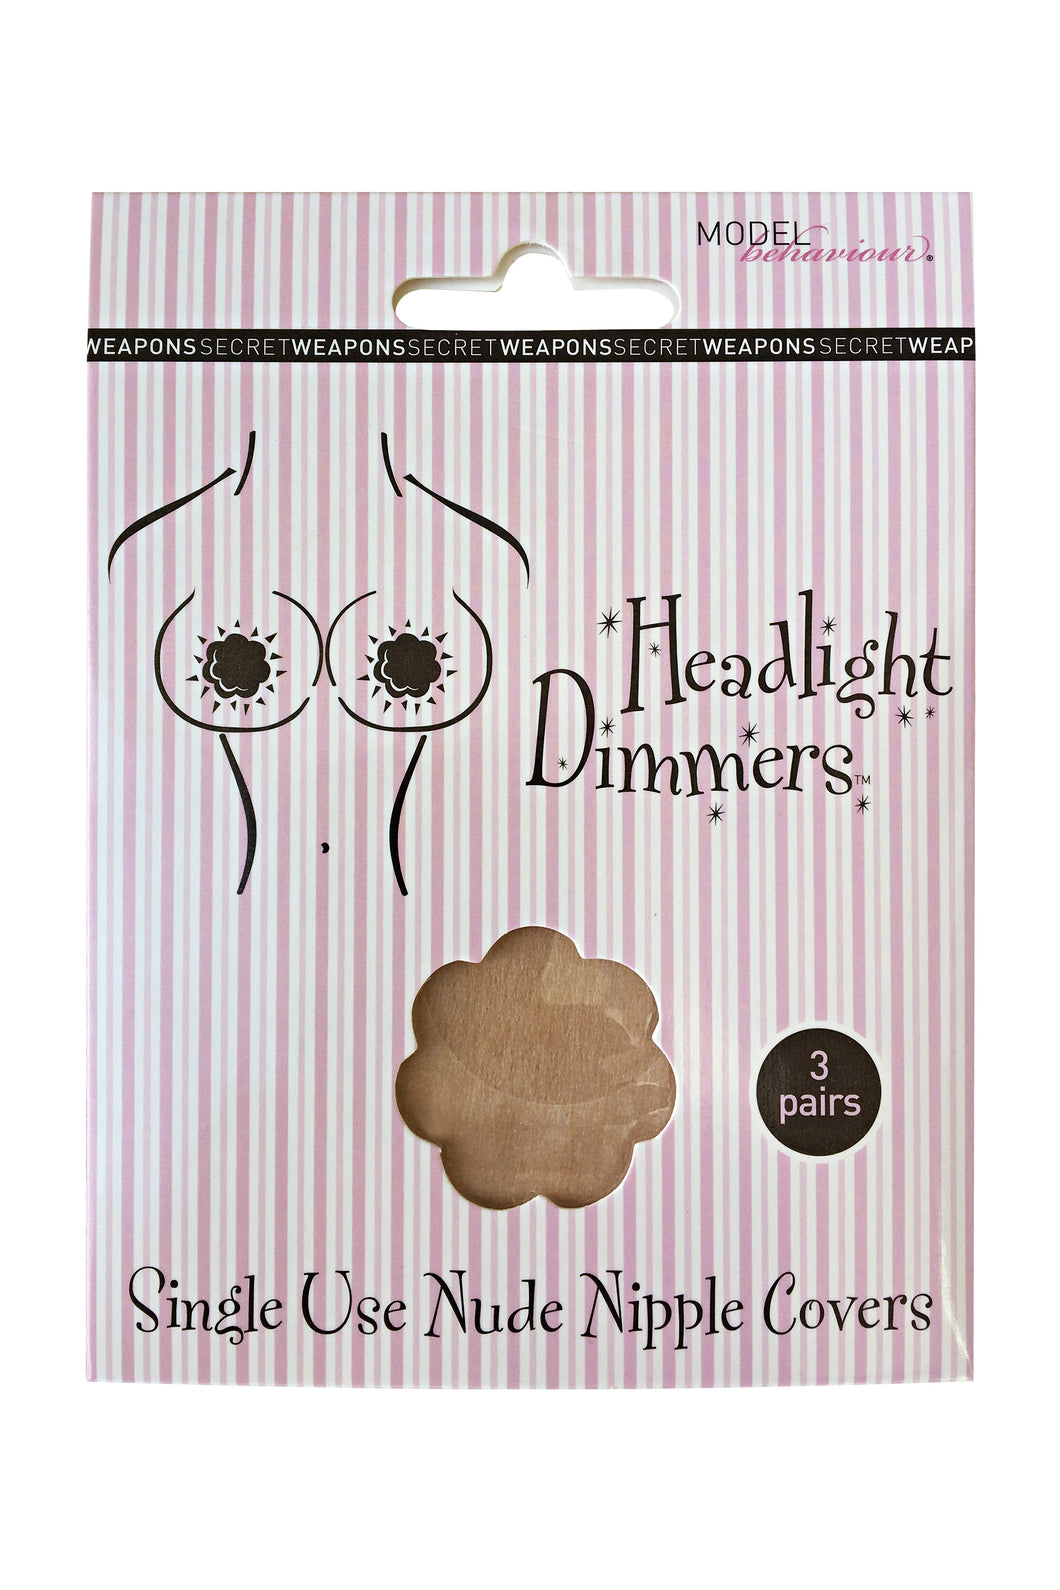 SECRET WEAPONS <BR>
3 Pairs of Headlight Dimmers/Nipple Covers <BR>
Nude <BR>